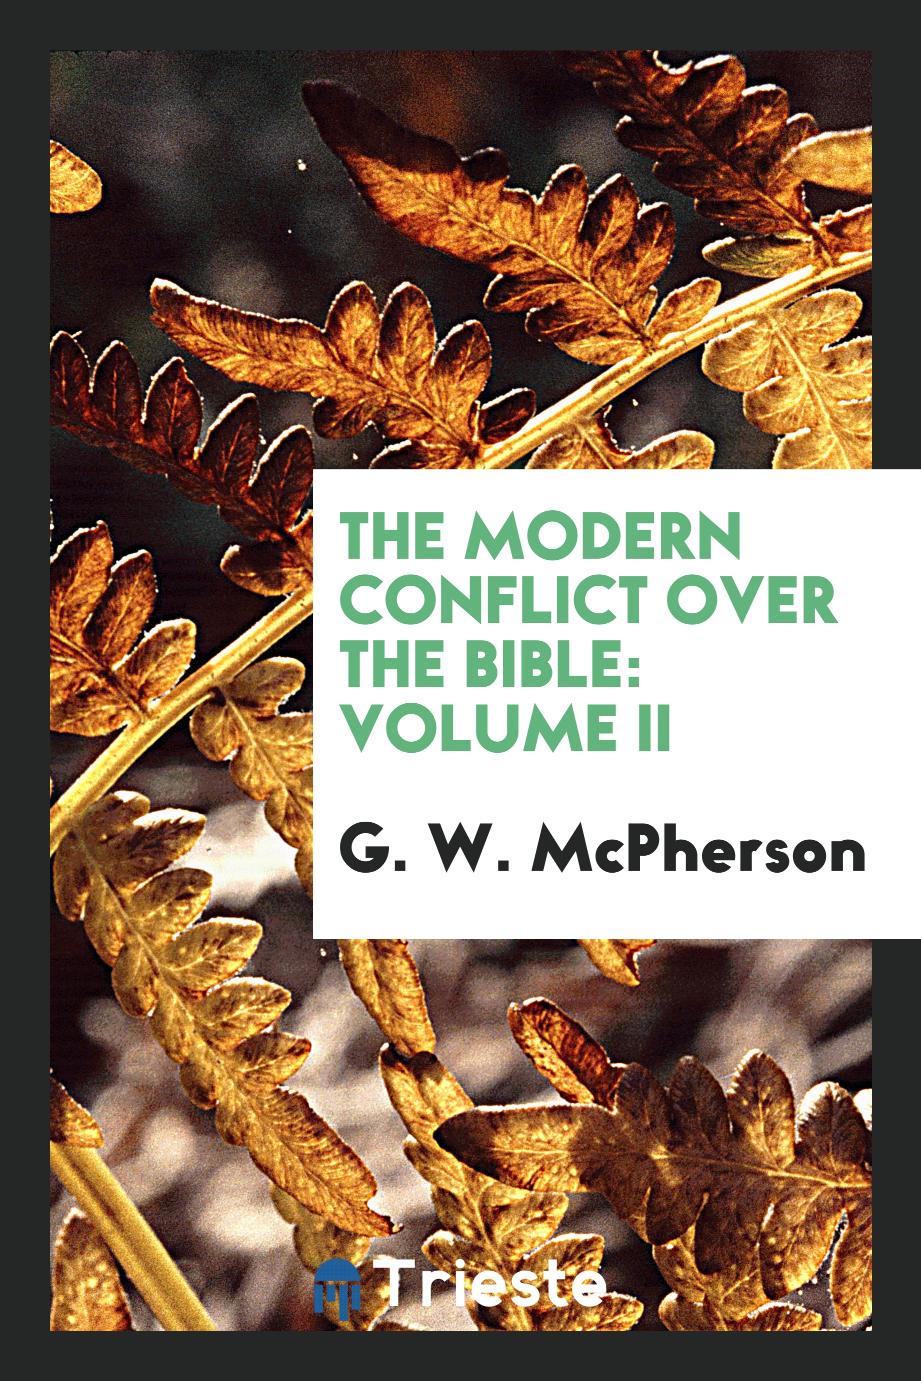 The modern conflict over the Bible: Volume II